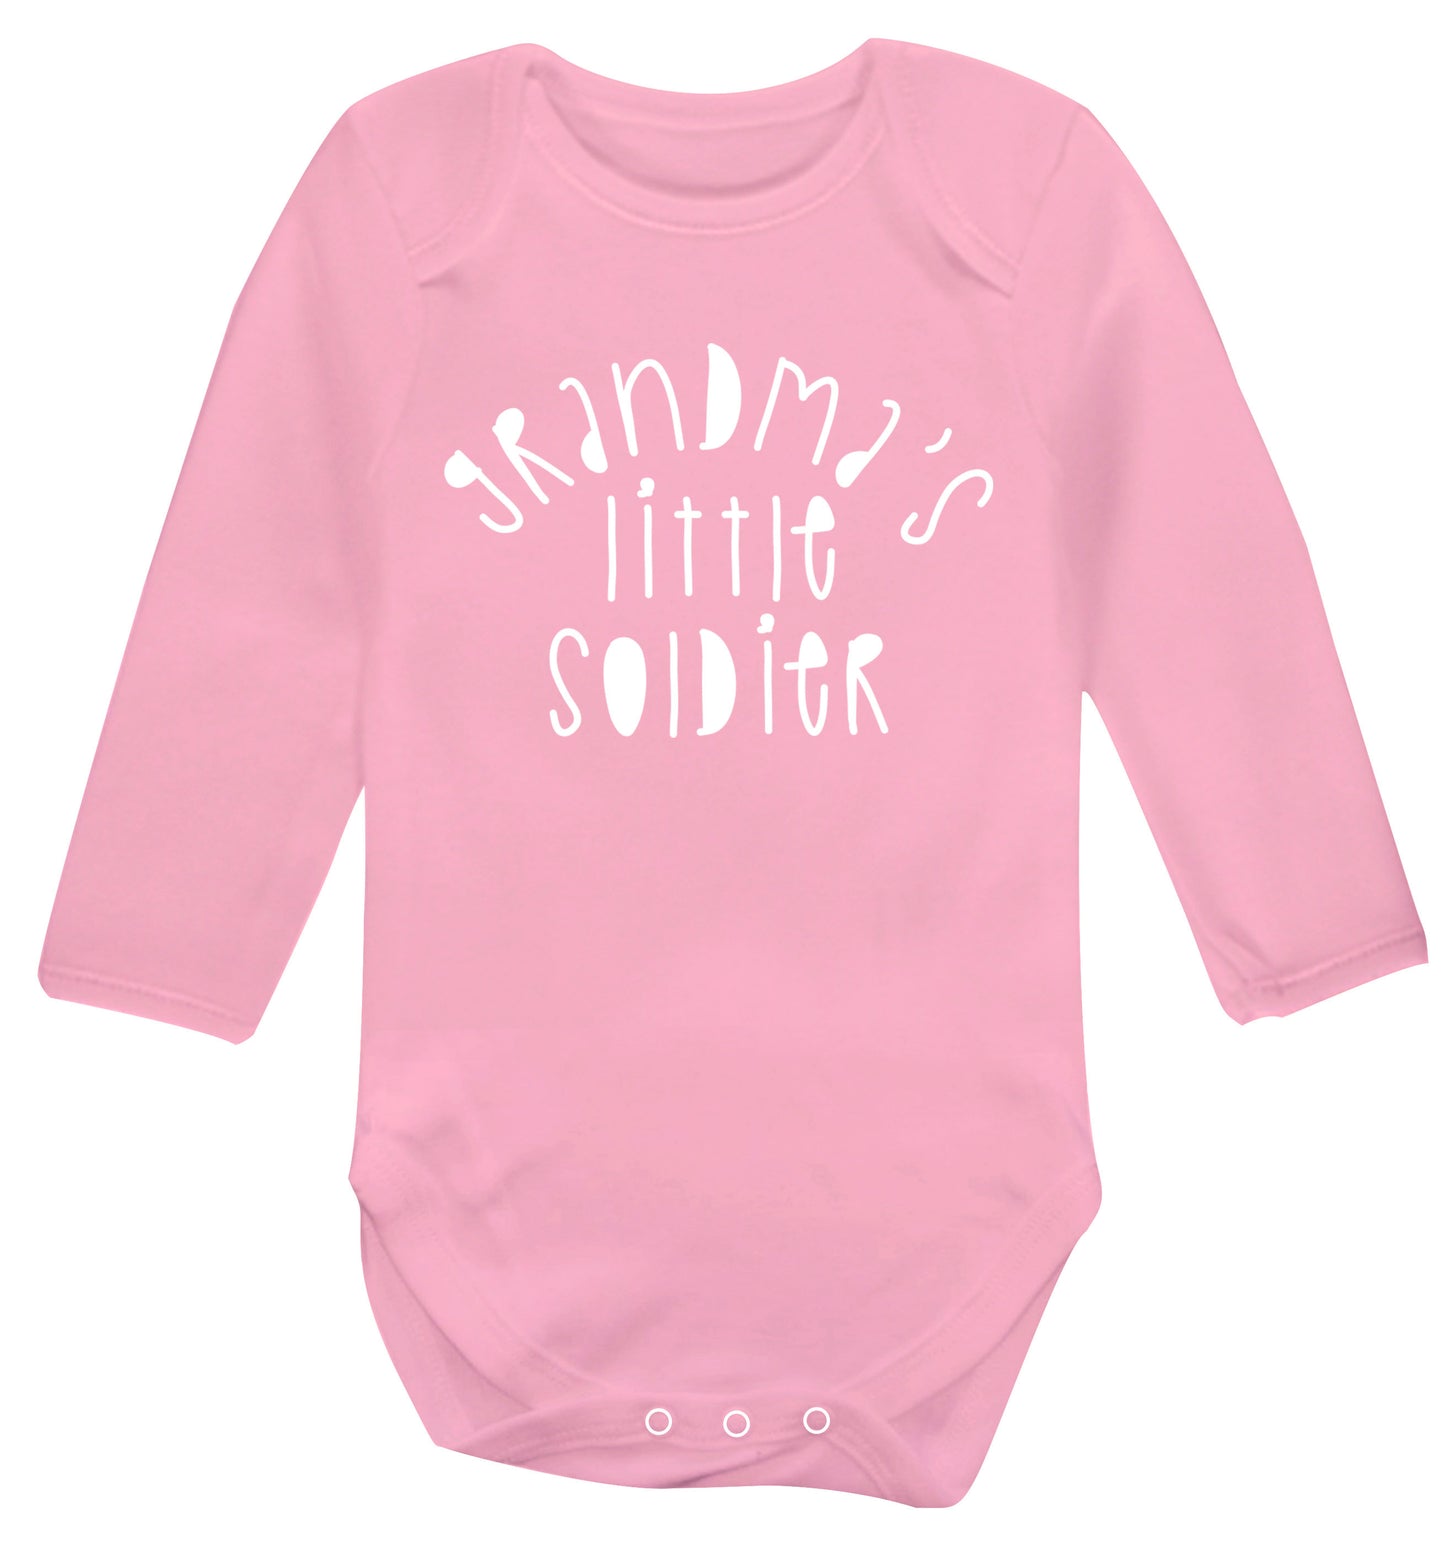 Grandma's little soldier Baby Vest long sleeved pale pink 6-12 months